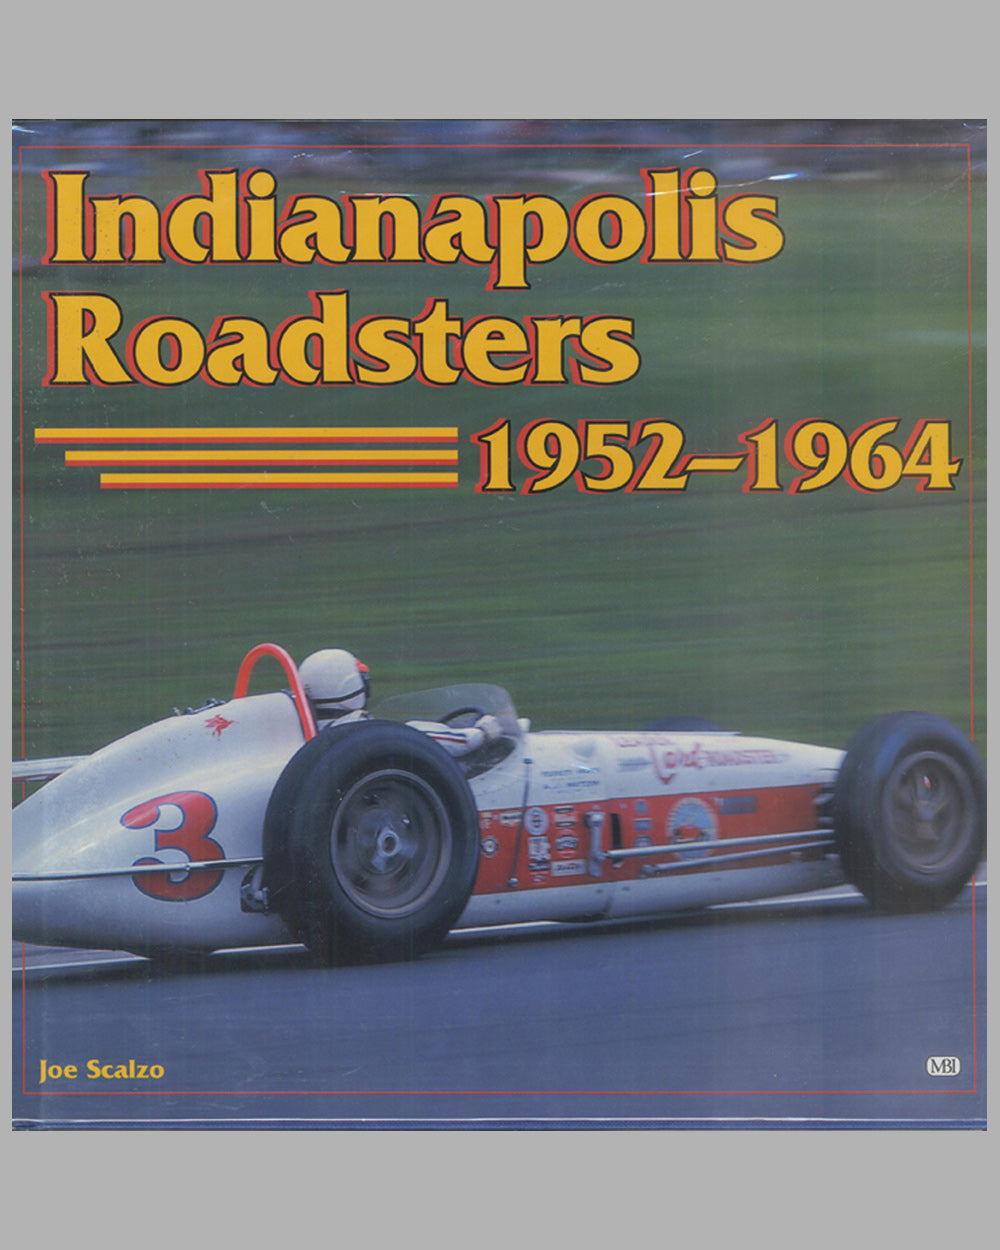 Indianapolis Roadster 1952-1964 book by Joe Scalzo, 1999